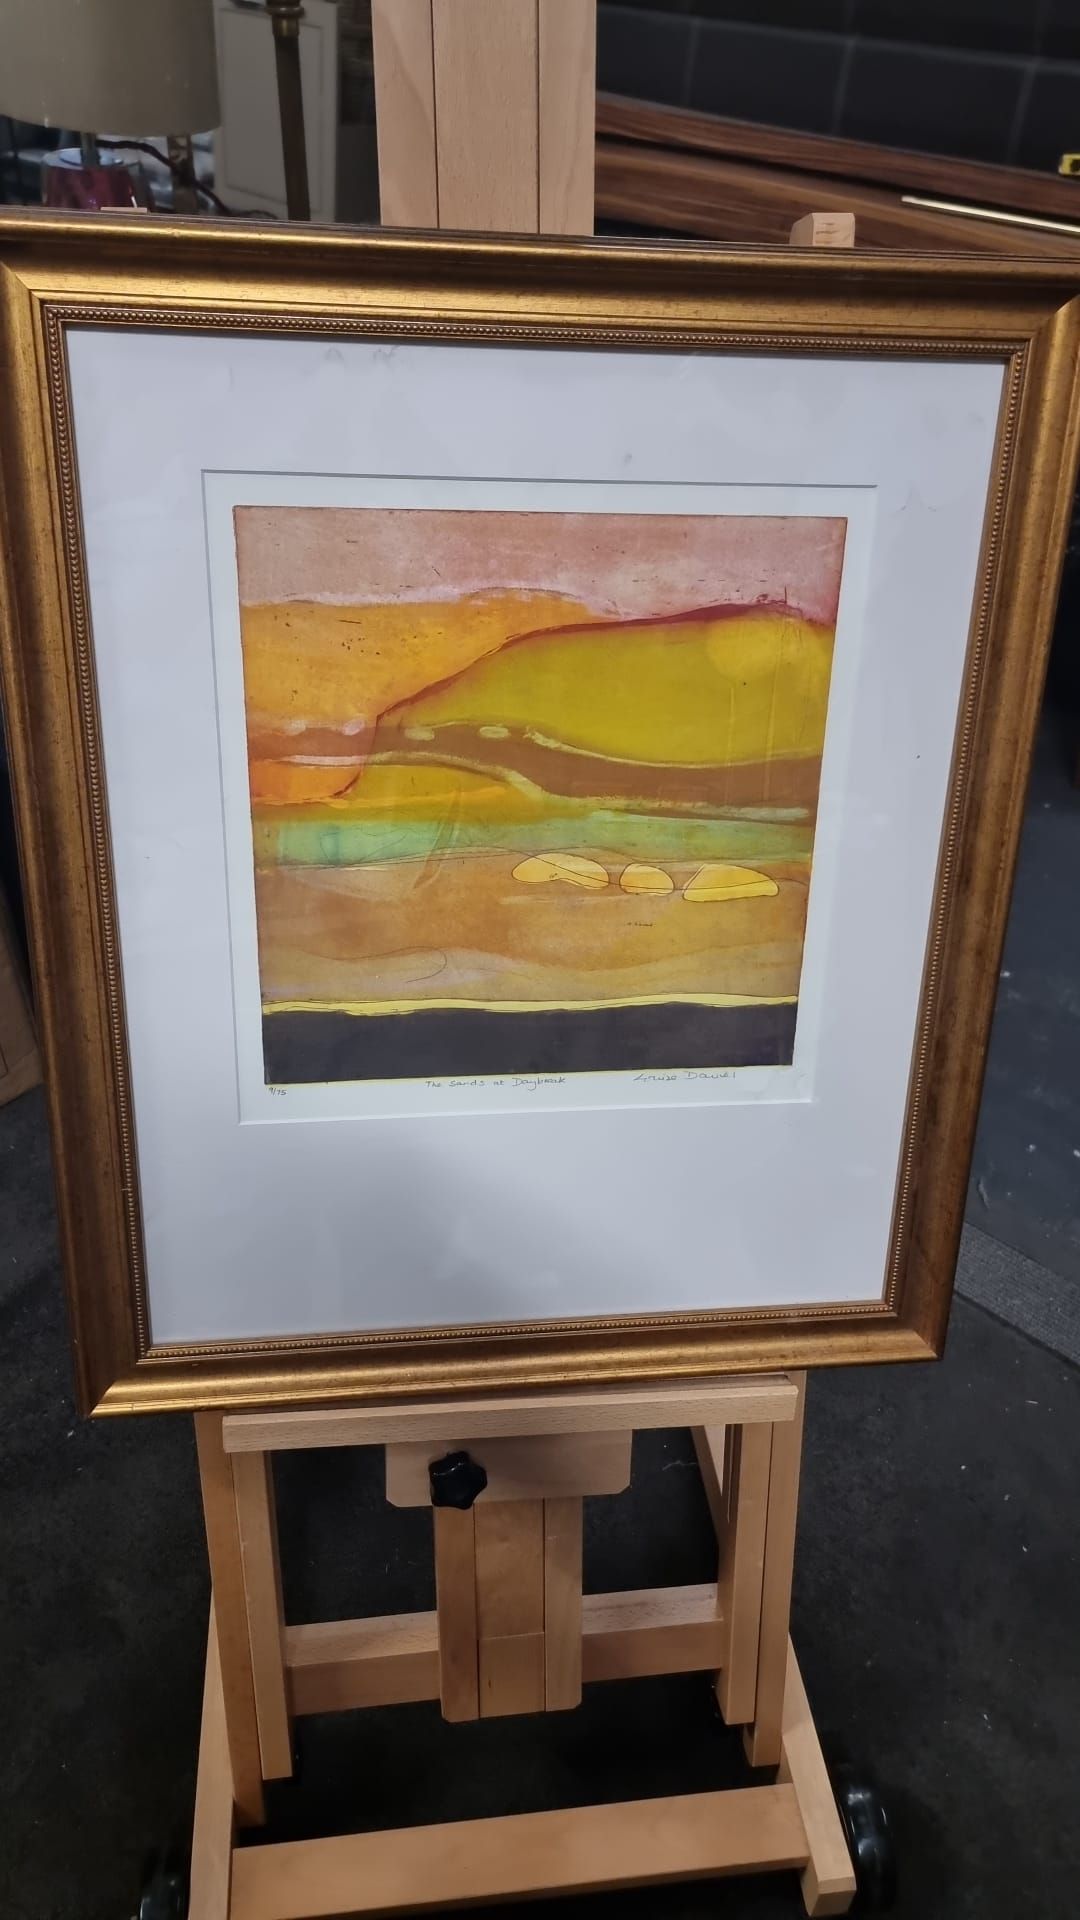 Framed Artwork The Sands At Day Break Limited Edition 9 Of 75 By Louise Davies (British) Signed 59 X